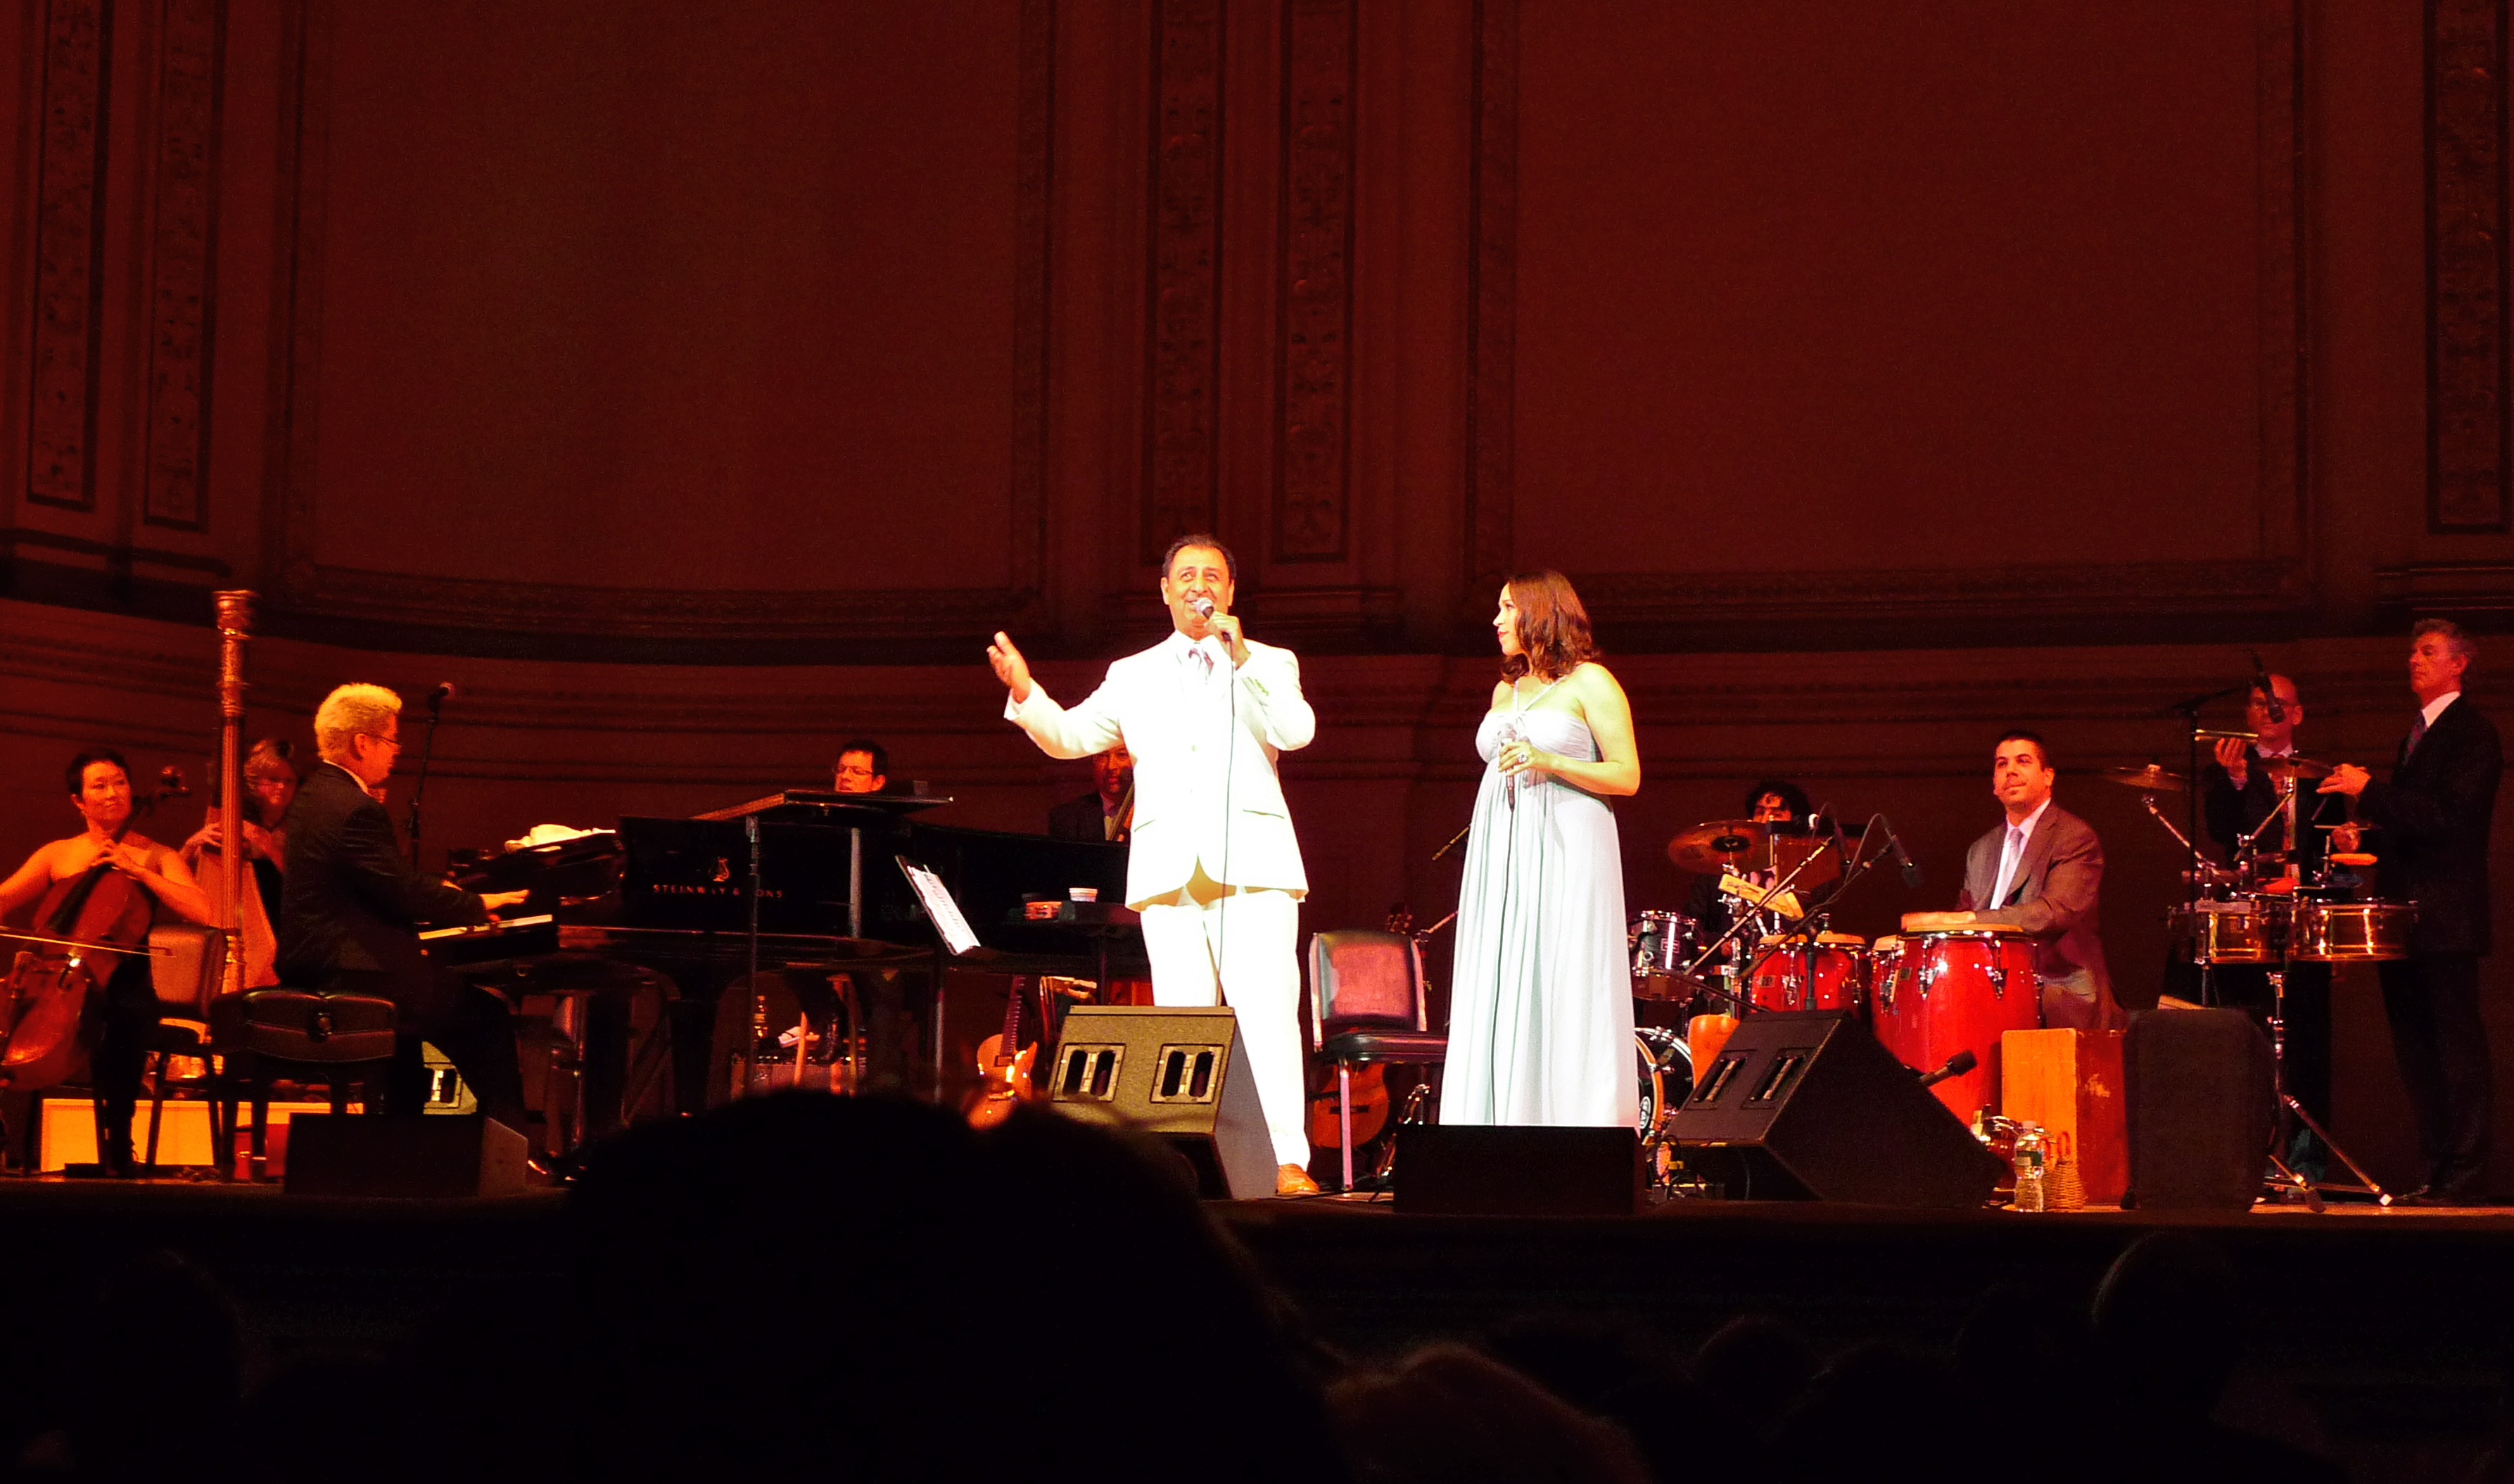 Guest appearance by Emilio Delgado, singing with Pink Martini at Carnegie Hall, June 18, 2009